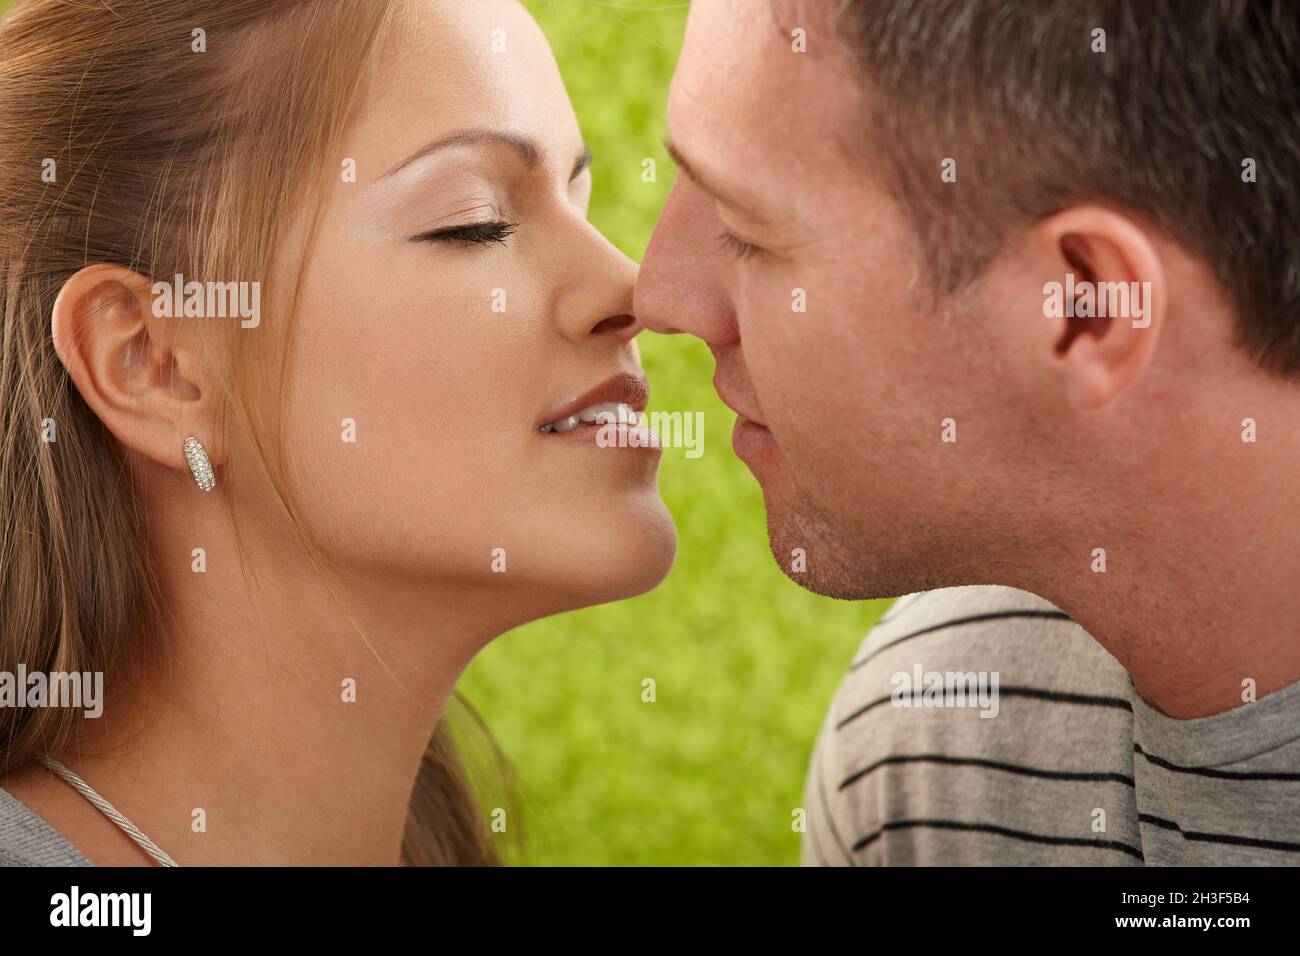 Passionate couple before kiss Stock Photo